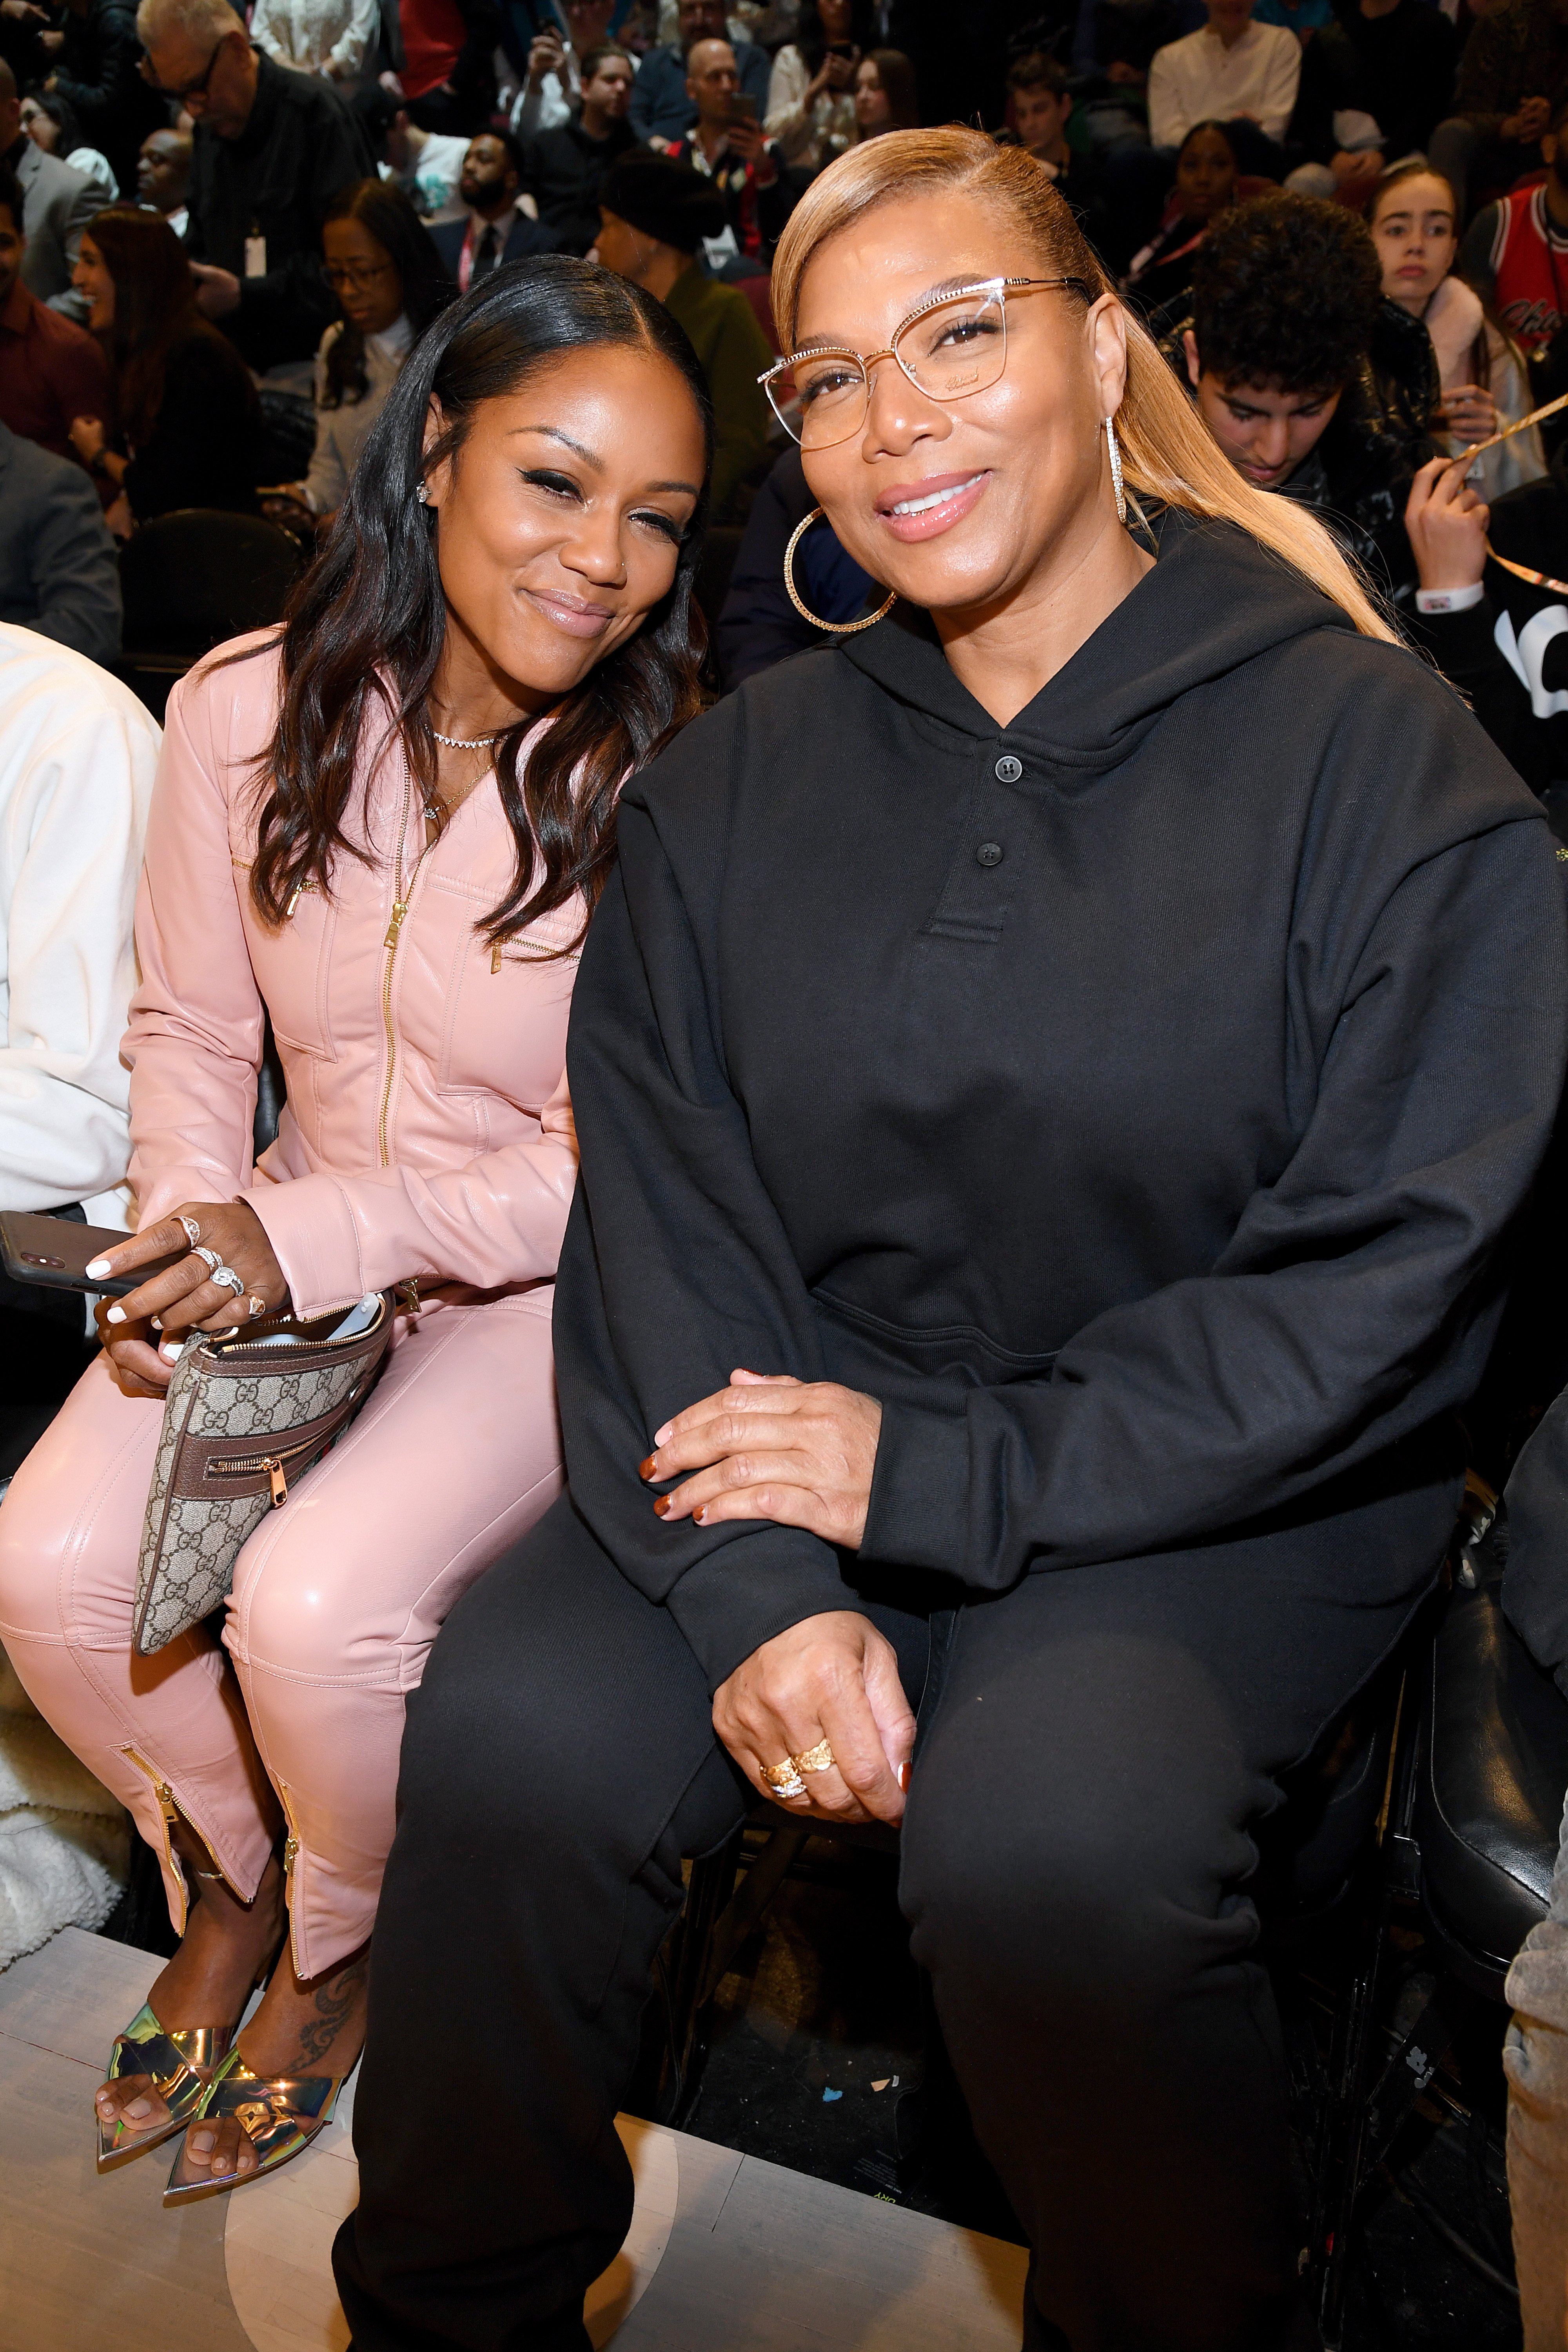 Eboni Nichols and Queen Latifah at the 69th NBA All-Star game in Chicago on January 16, 2020 | Source: Getty Images 